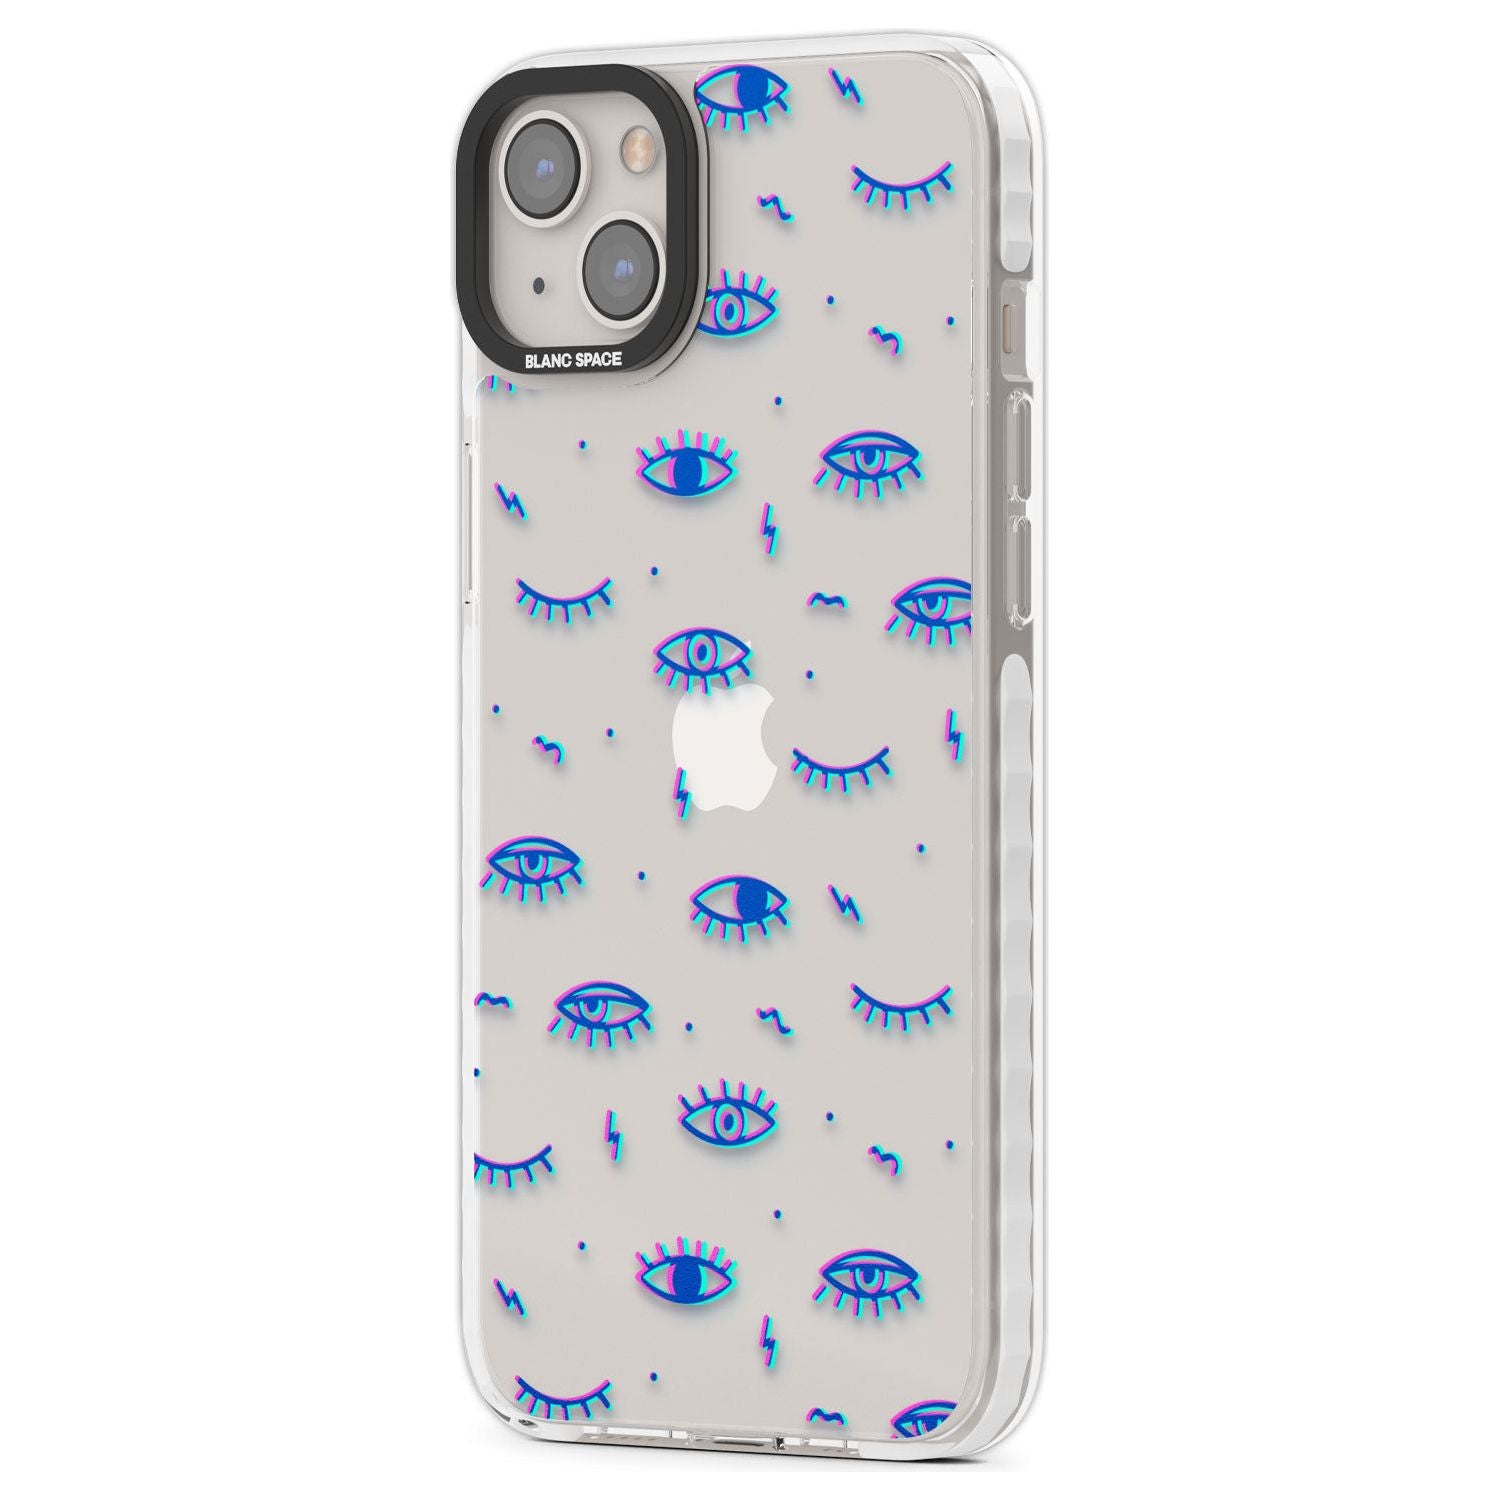 Duotone Psychedelic Eyes Phone Case iPhone 15 Pro Max / Black Impact Case,iPhone 15 Plus / Black Impact Case,iPhone 15 Pro / Black Impact Case,iPhone 15 / Black Impact Case,iPhone 15 Pro Max / Impact Case,iPhone 15 Plus / Impact Case,iPhone 15 Pro / Impact Case,iPhone 15 / Impact Case,iPhone 15 Pro Max / Magsafe Black Impact Case,iPhone 15 Plus / Magsafe Black Impact Case,iPhone 15 Pro / Magsafe Black Impact Case,iPhone 15 / Magsafe Black Impact Case,iPhone 14 Pro Max / Black Impact Case,iPhone 14 Plus / Bl